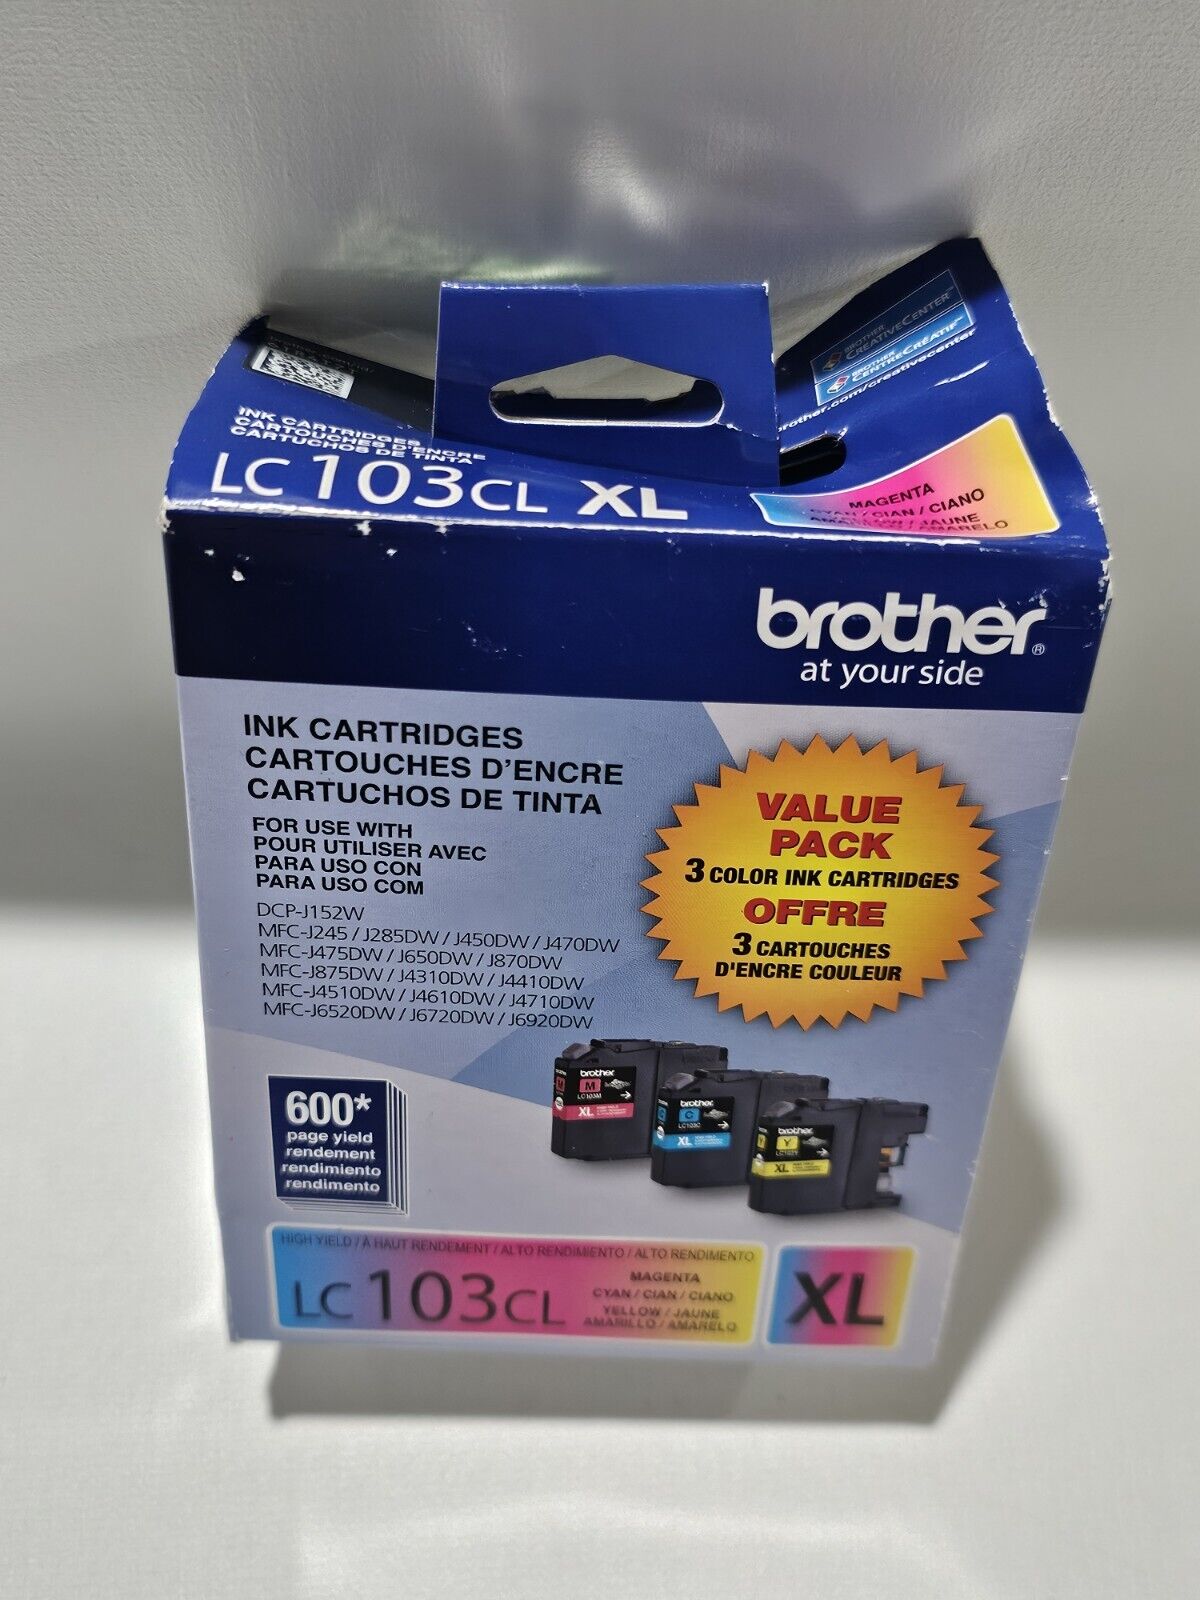 Brother LC103CL XL Printer Ink Cartridge (Yellow/Magenta/Cyan) Expired 2019